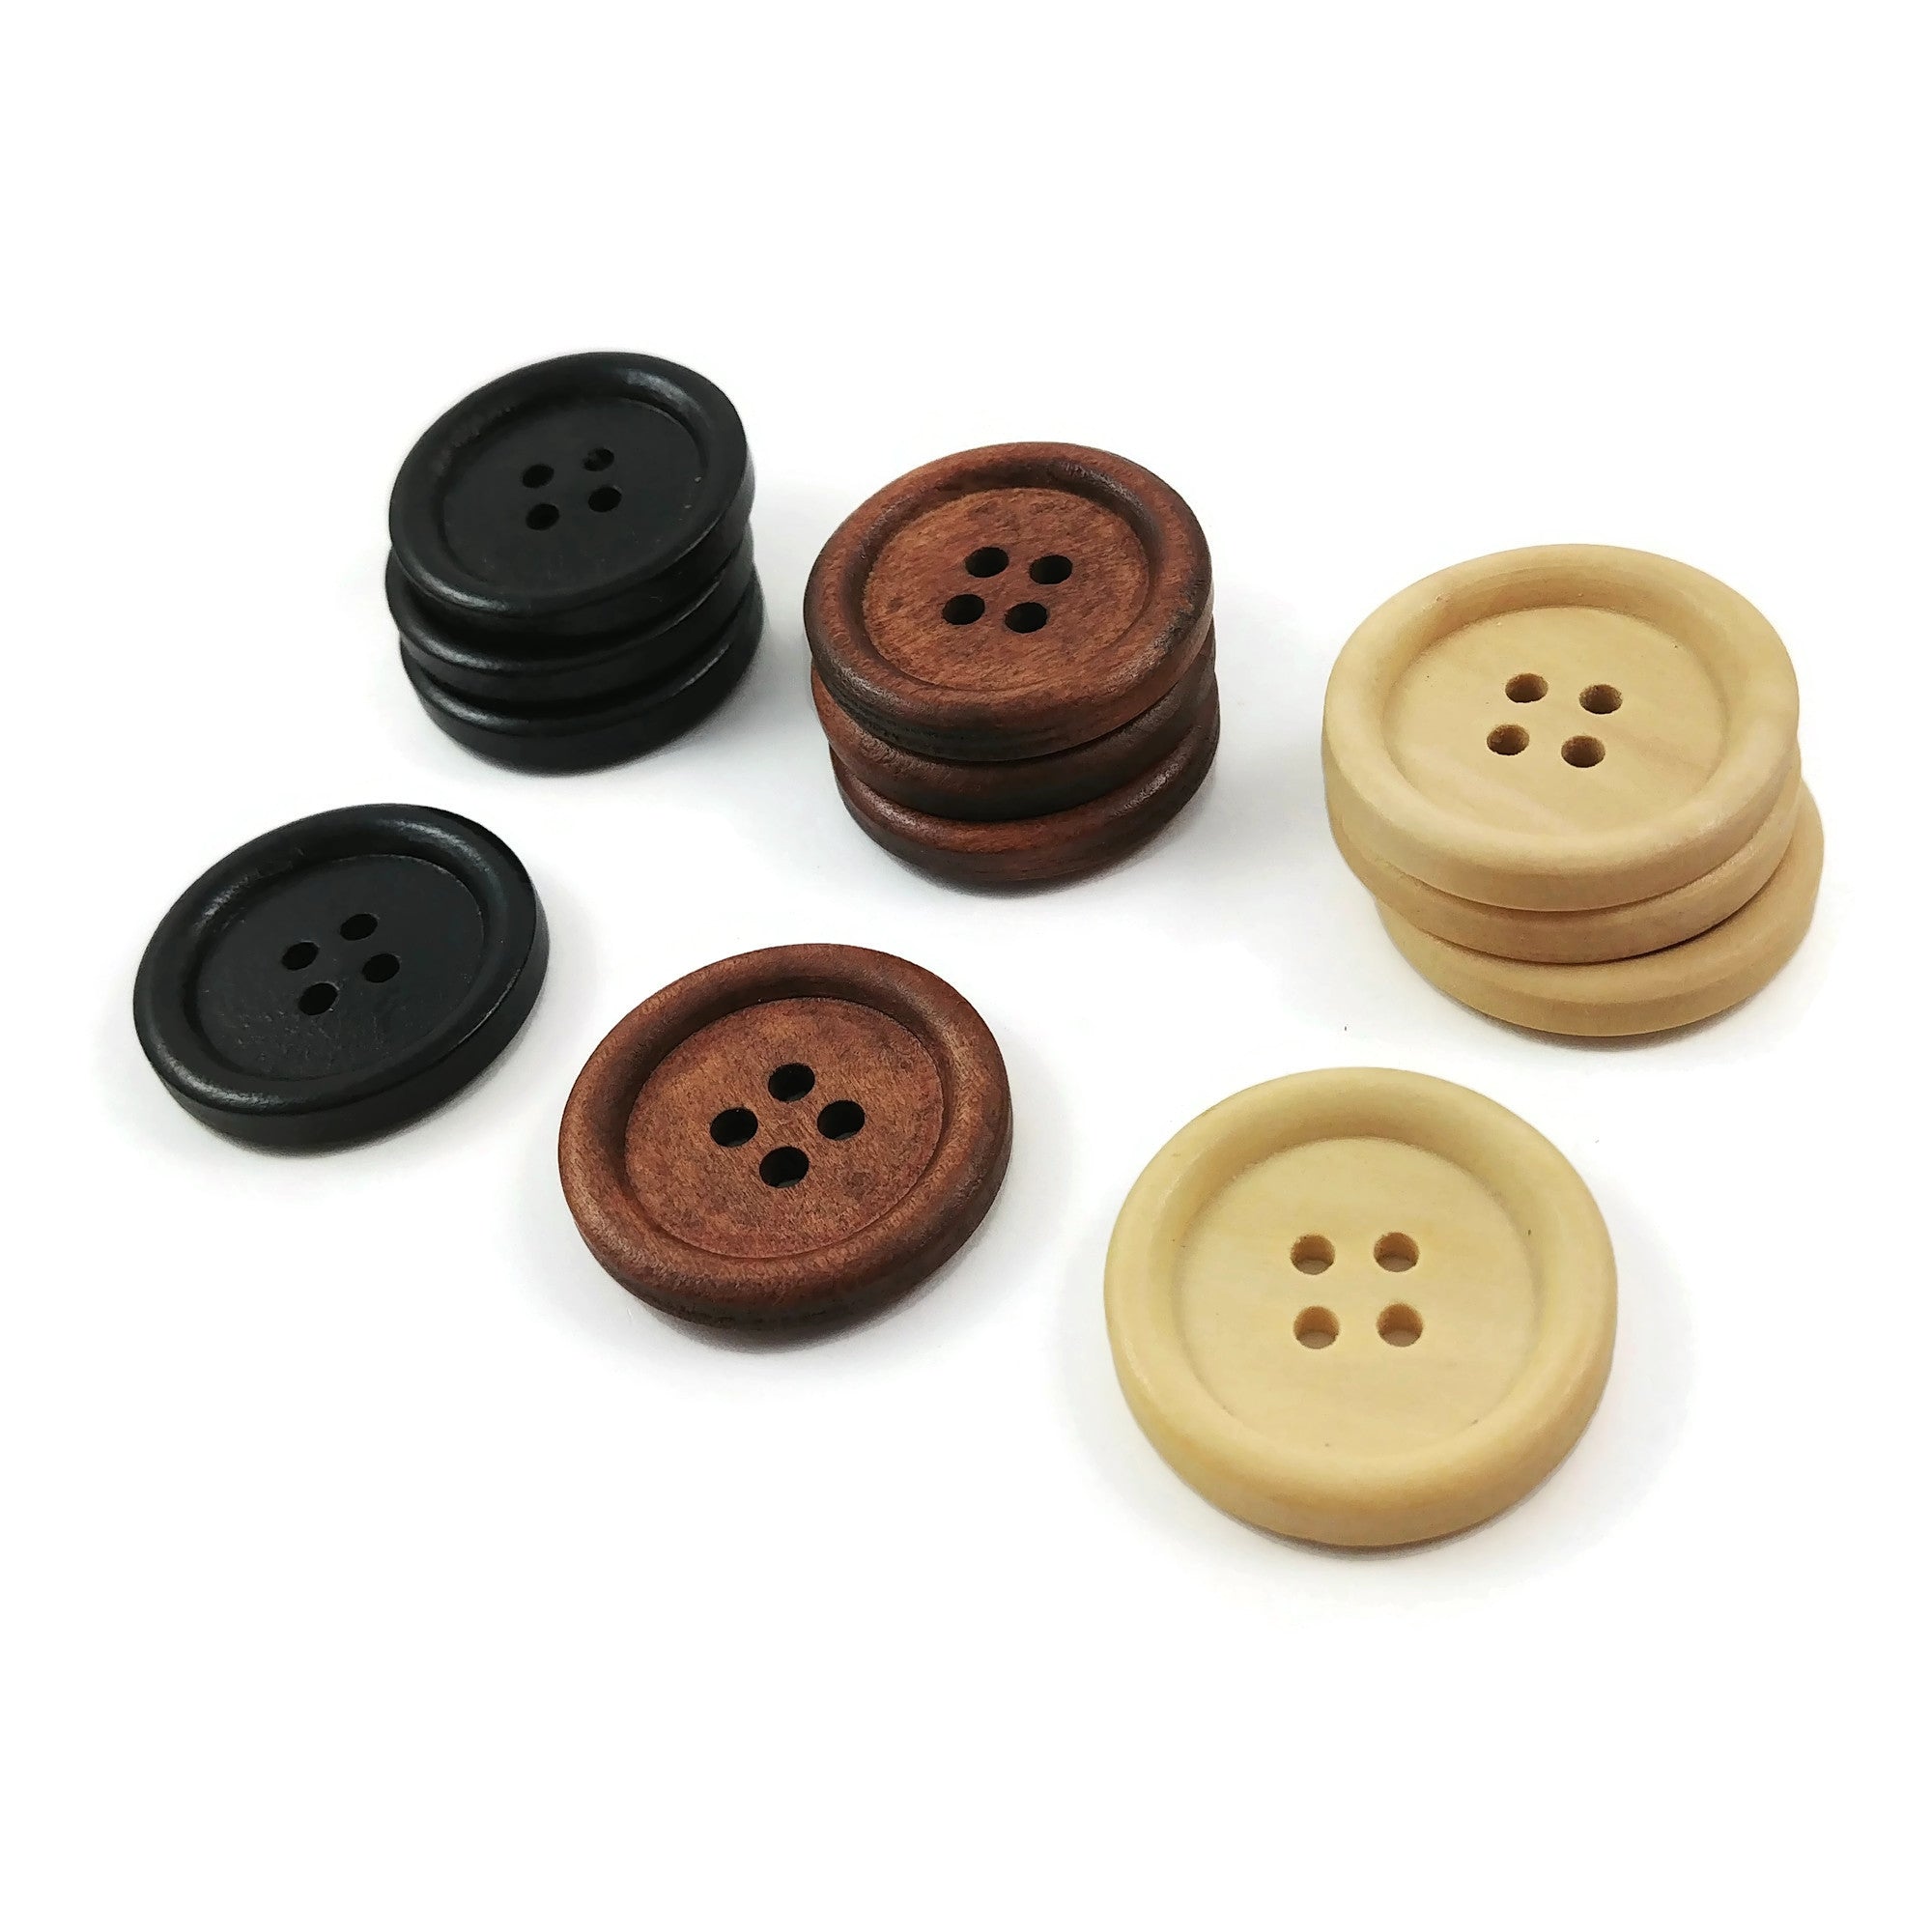 1 inch Wooden Buttons, 60 Pcs 25mm Brown Sewing Flatback Button Wooden  Craft Buttons for Sewing or Craft